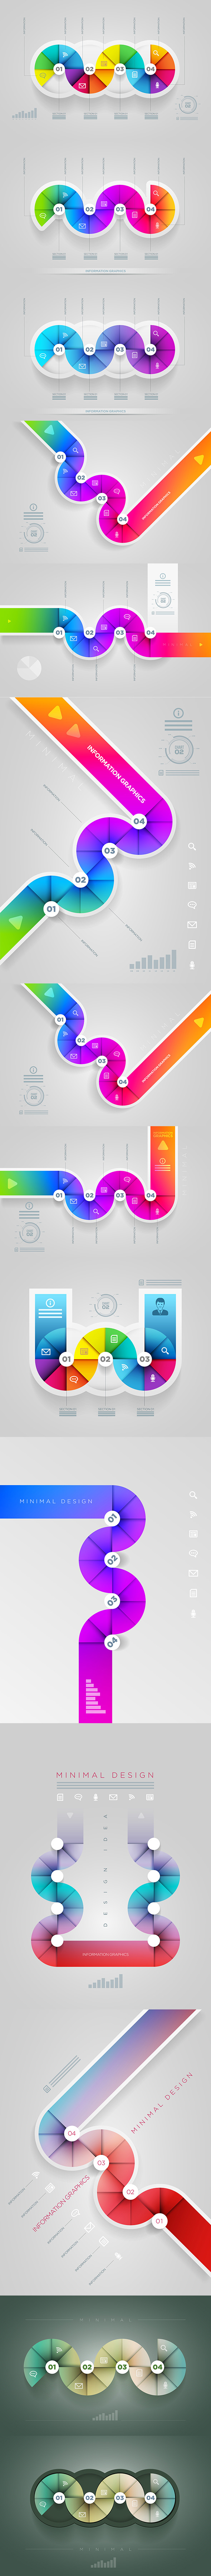 infographic design template business vector microstock colorful